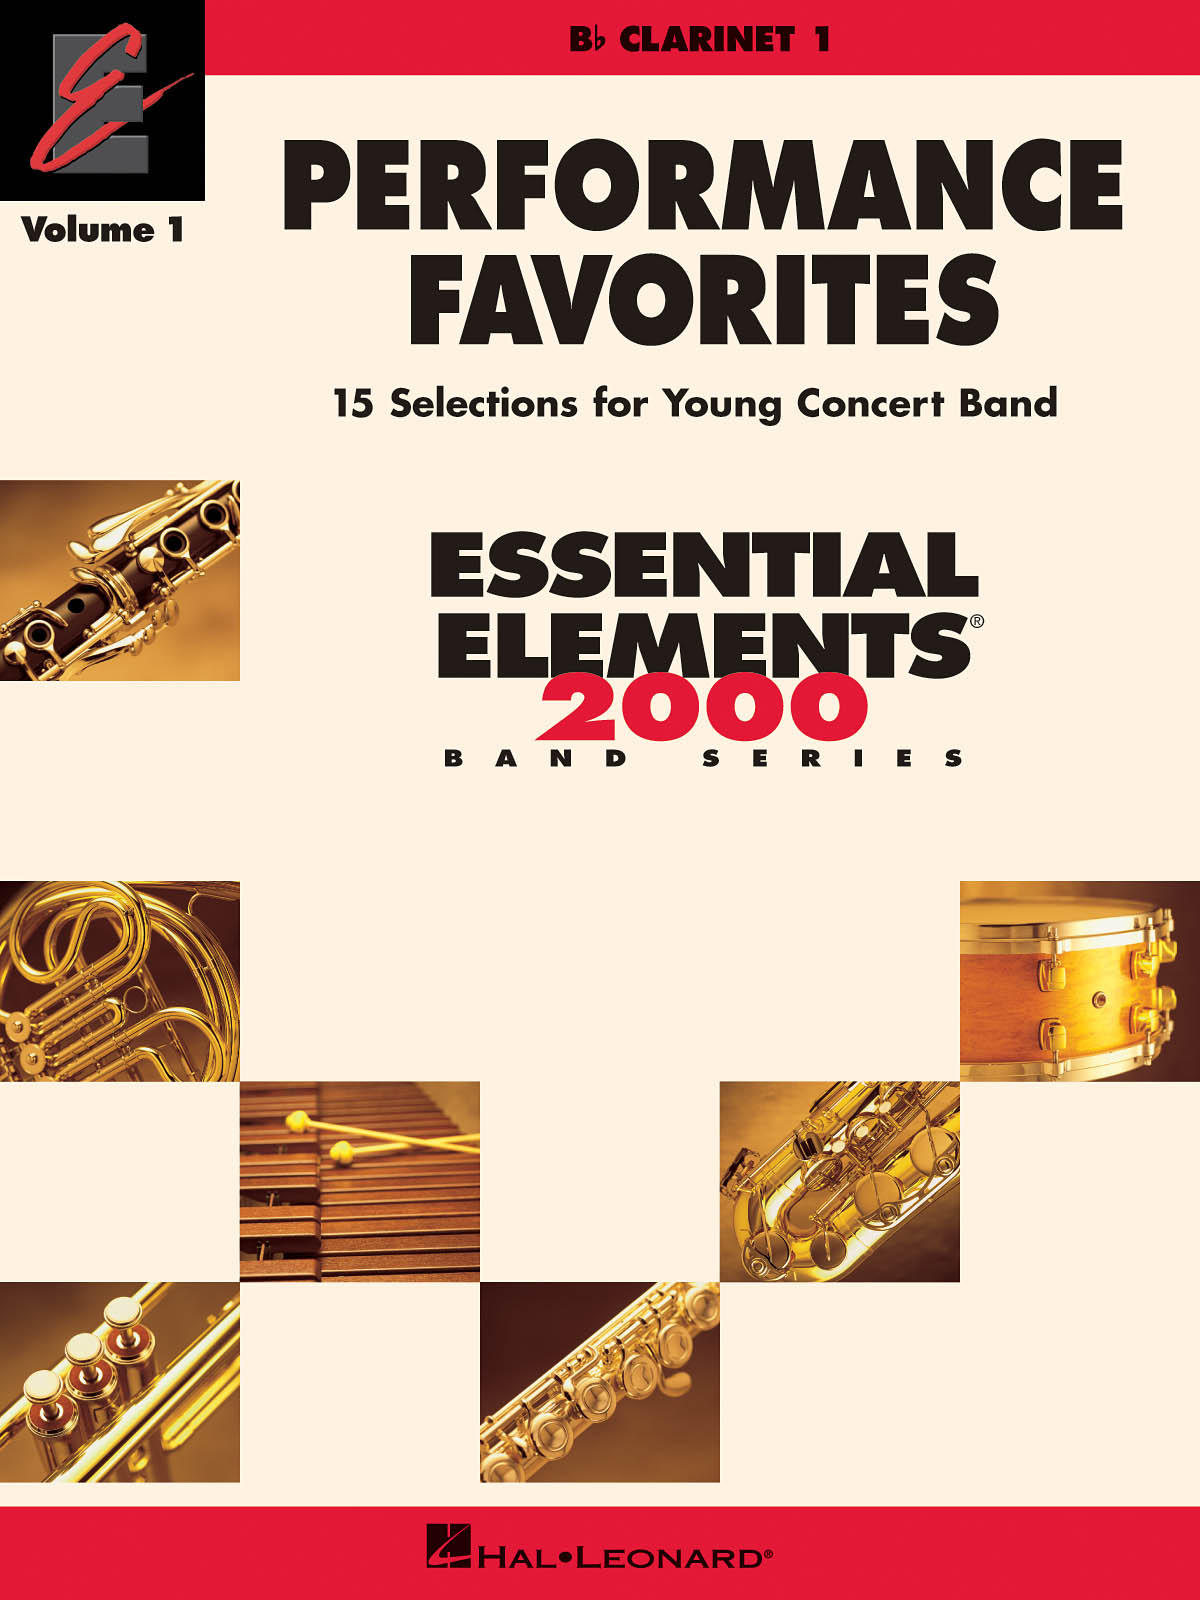 Performance Favorites Vol. 1 - Clarinet 1 - 15 Selections for Young Concert Band - noty na klarinet